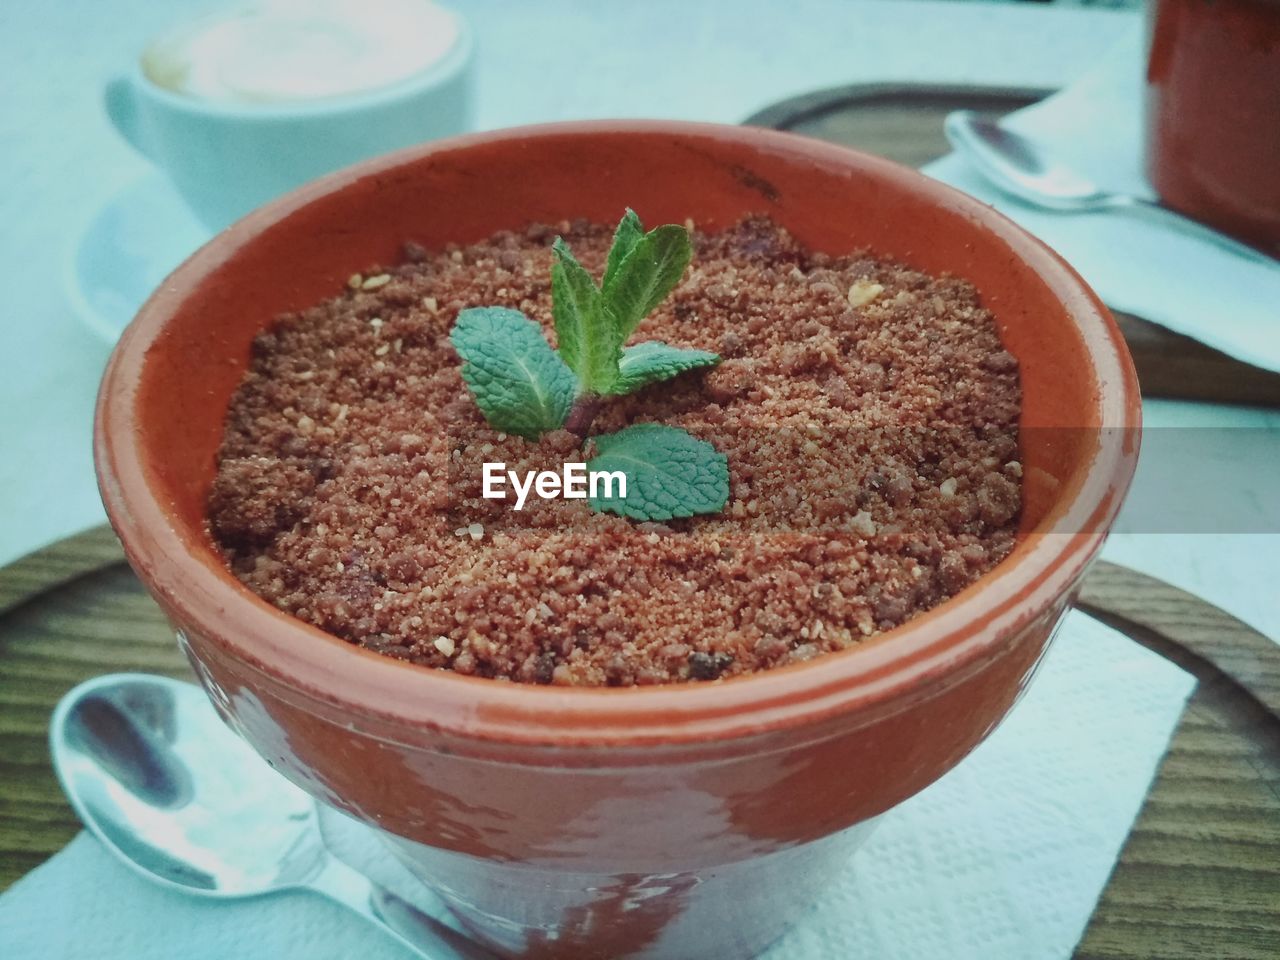 CLOSE-UP OF POTTED PLANT IN PLATE